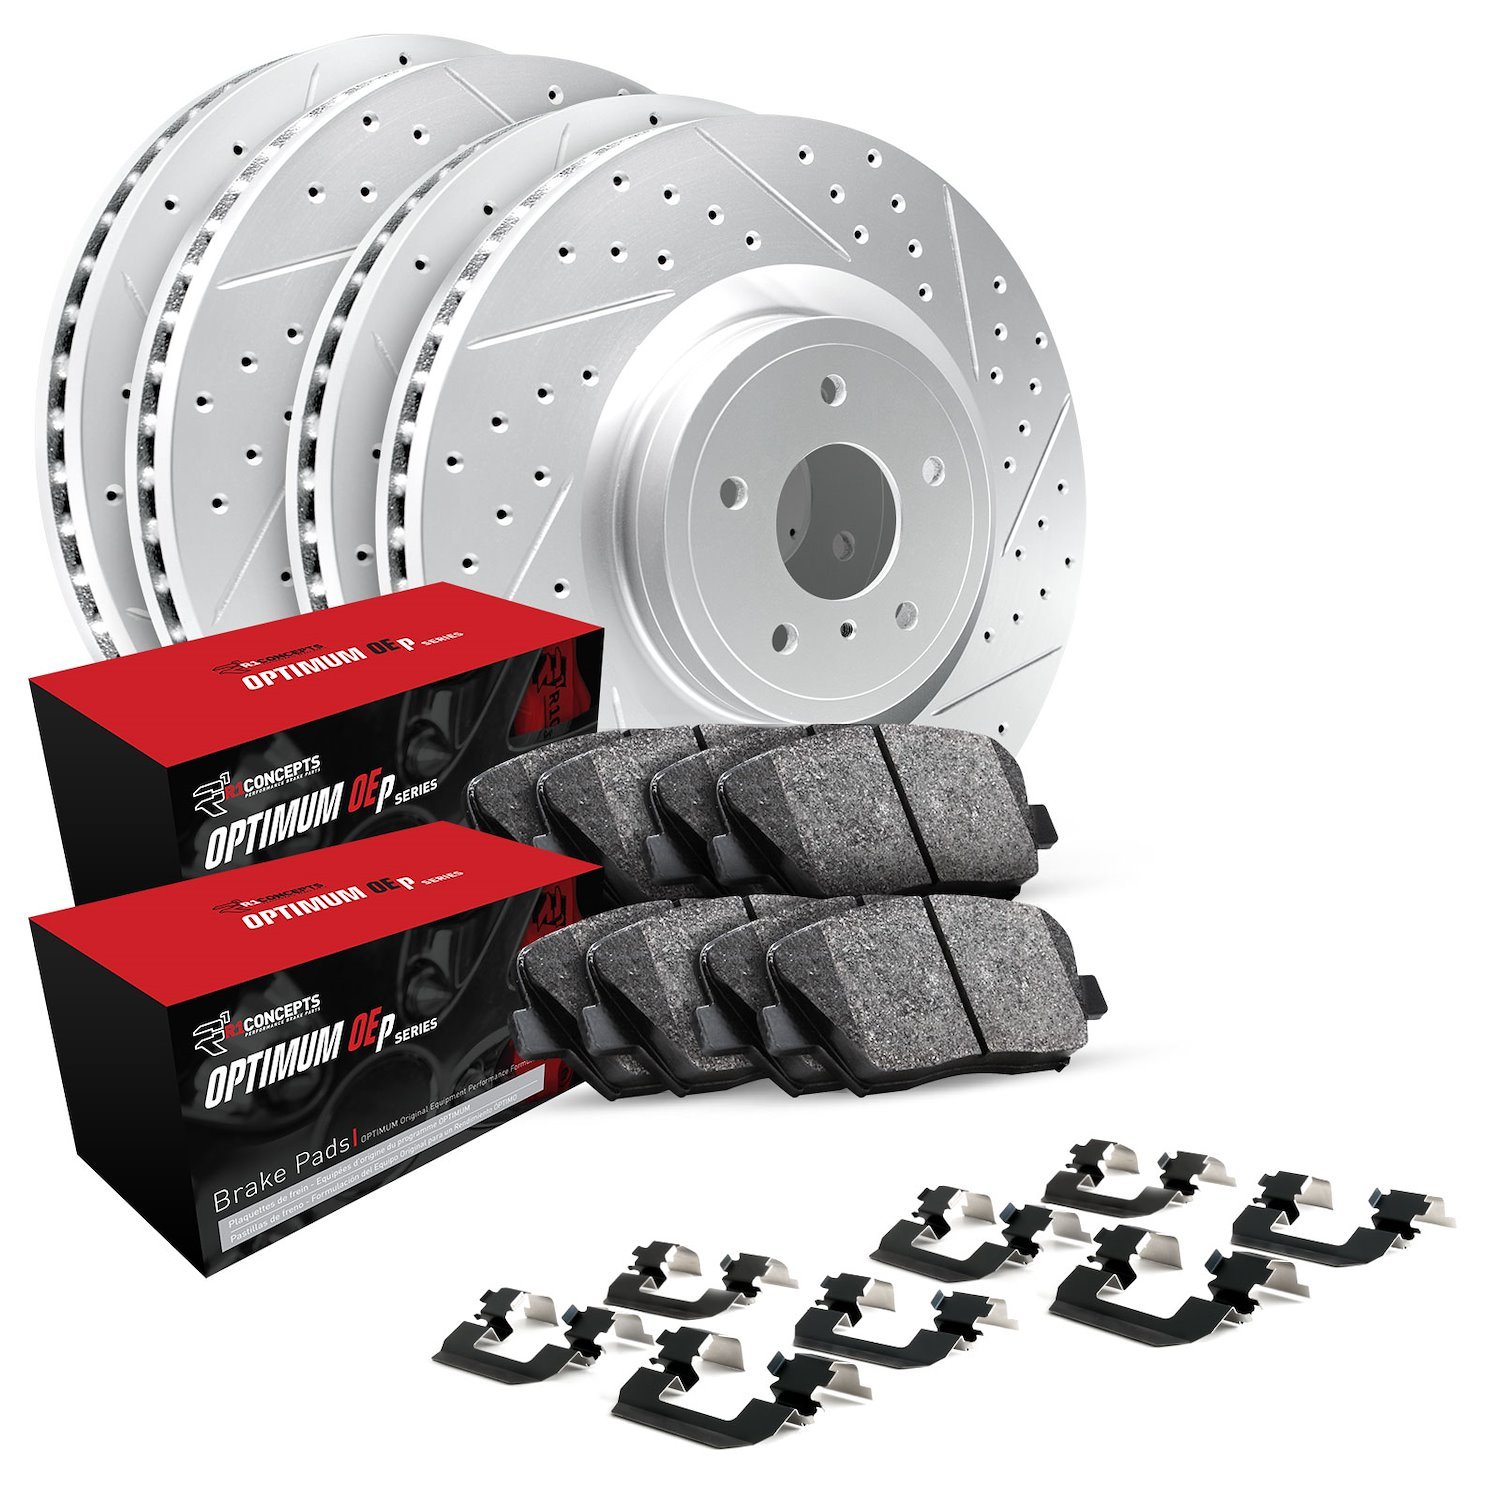 GEO-Carbon Drilled & Slotted Brake Rotor & Drum Set w/Optimum OE Pads, Shoes, & Hardware, 2013-2021 Fits Multiple Makes/Models